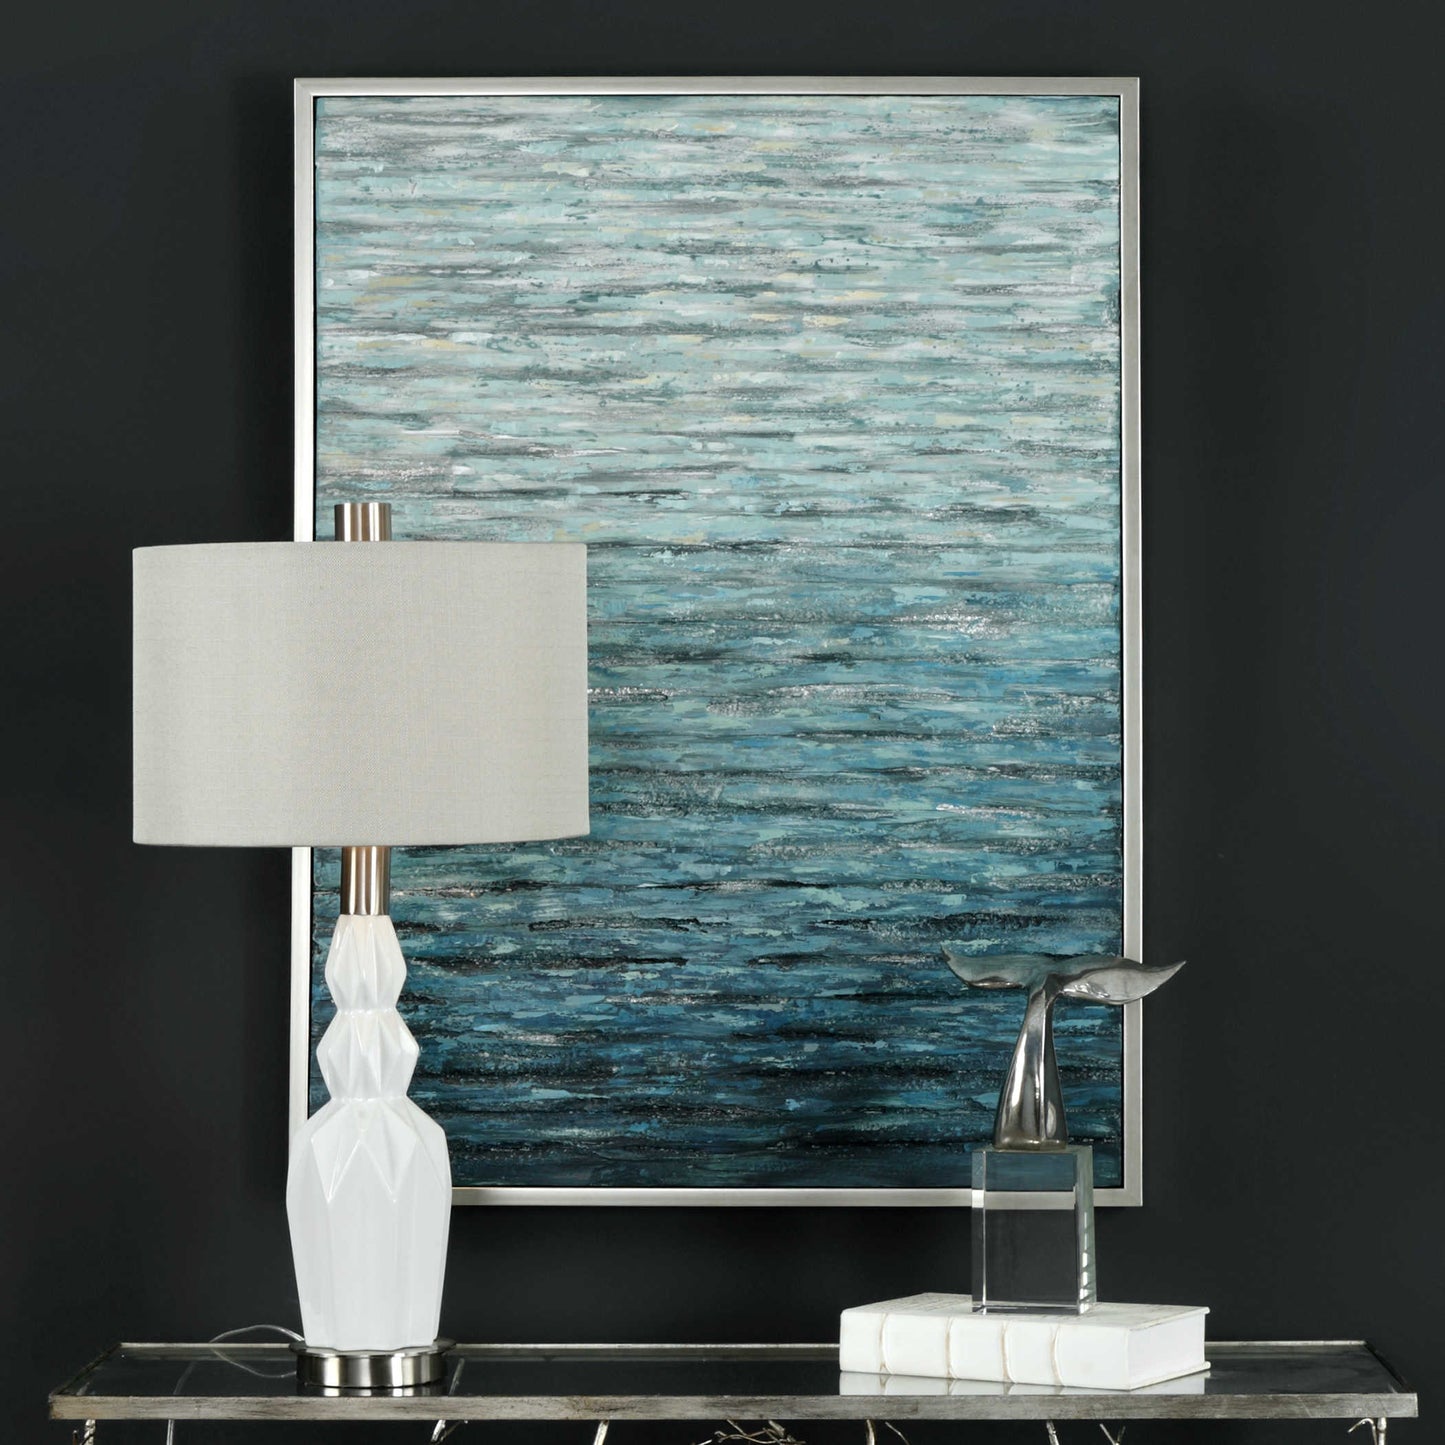 Blue textured print of waves on water that are abstract behind a white lamp and decorative sculpture on a gray background. 